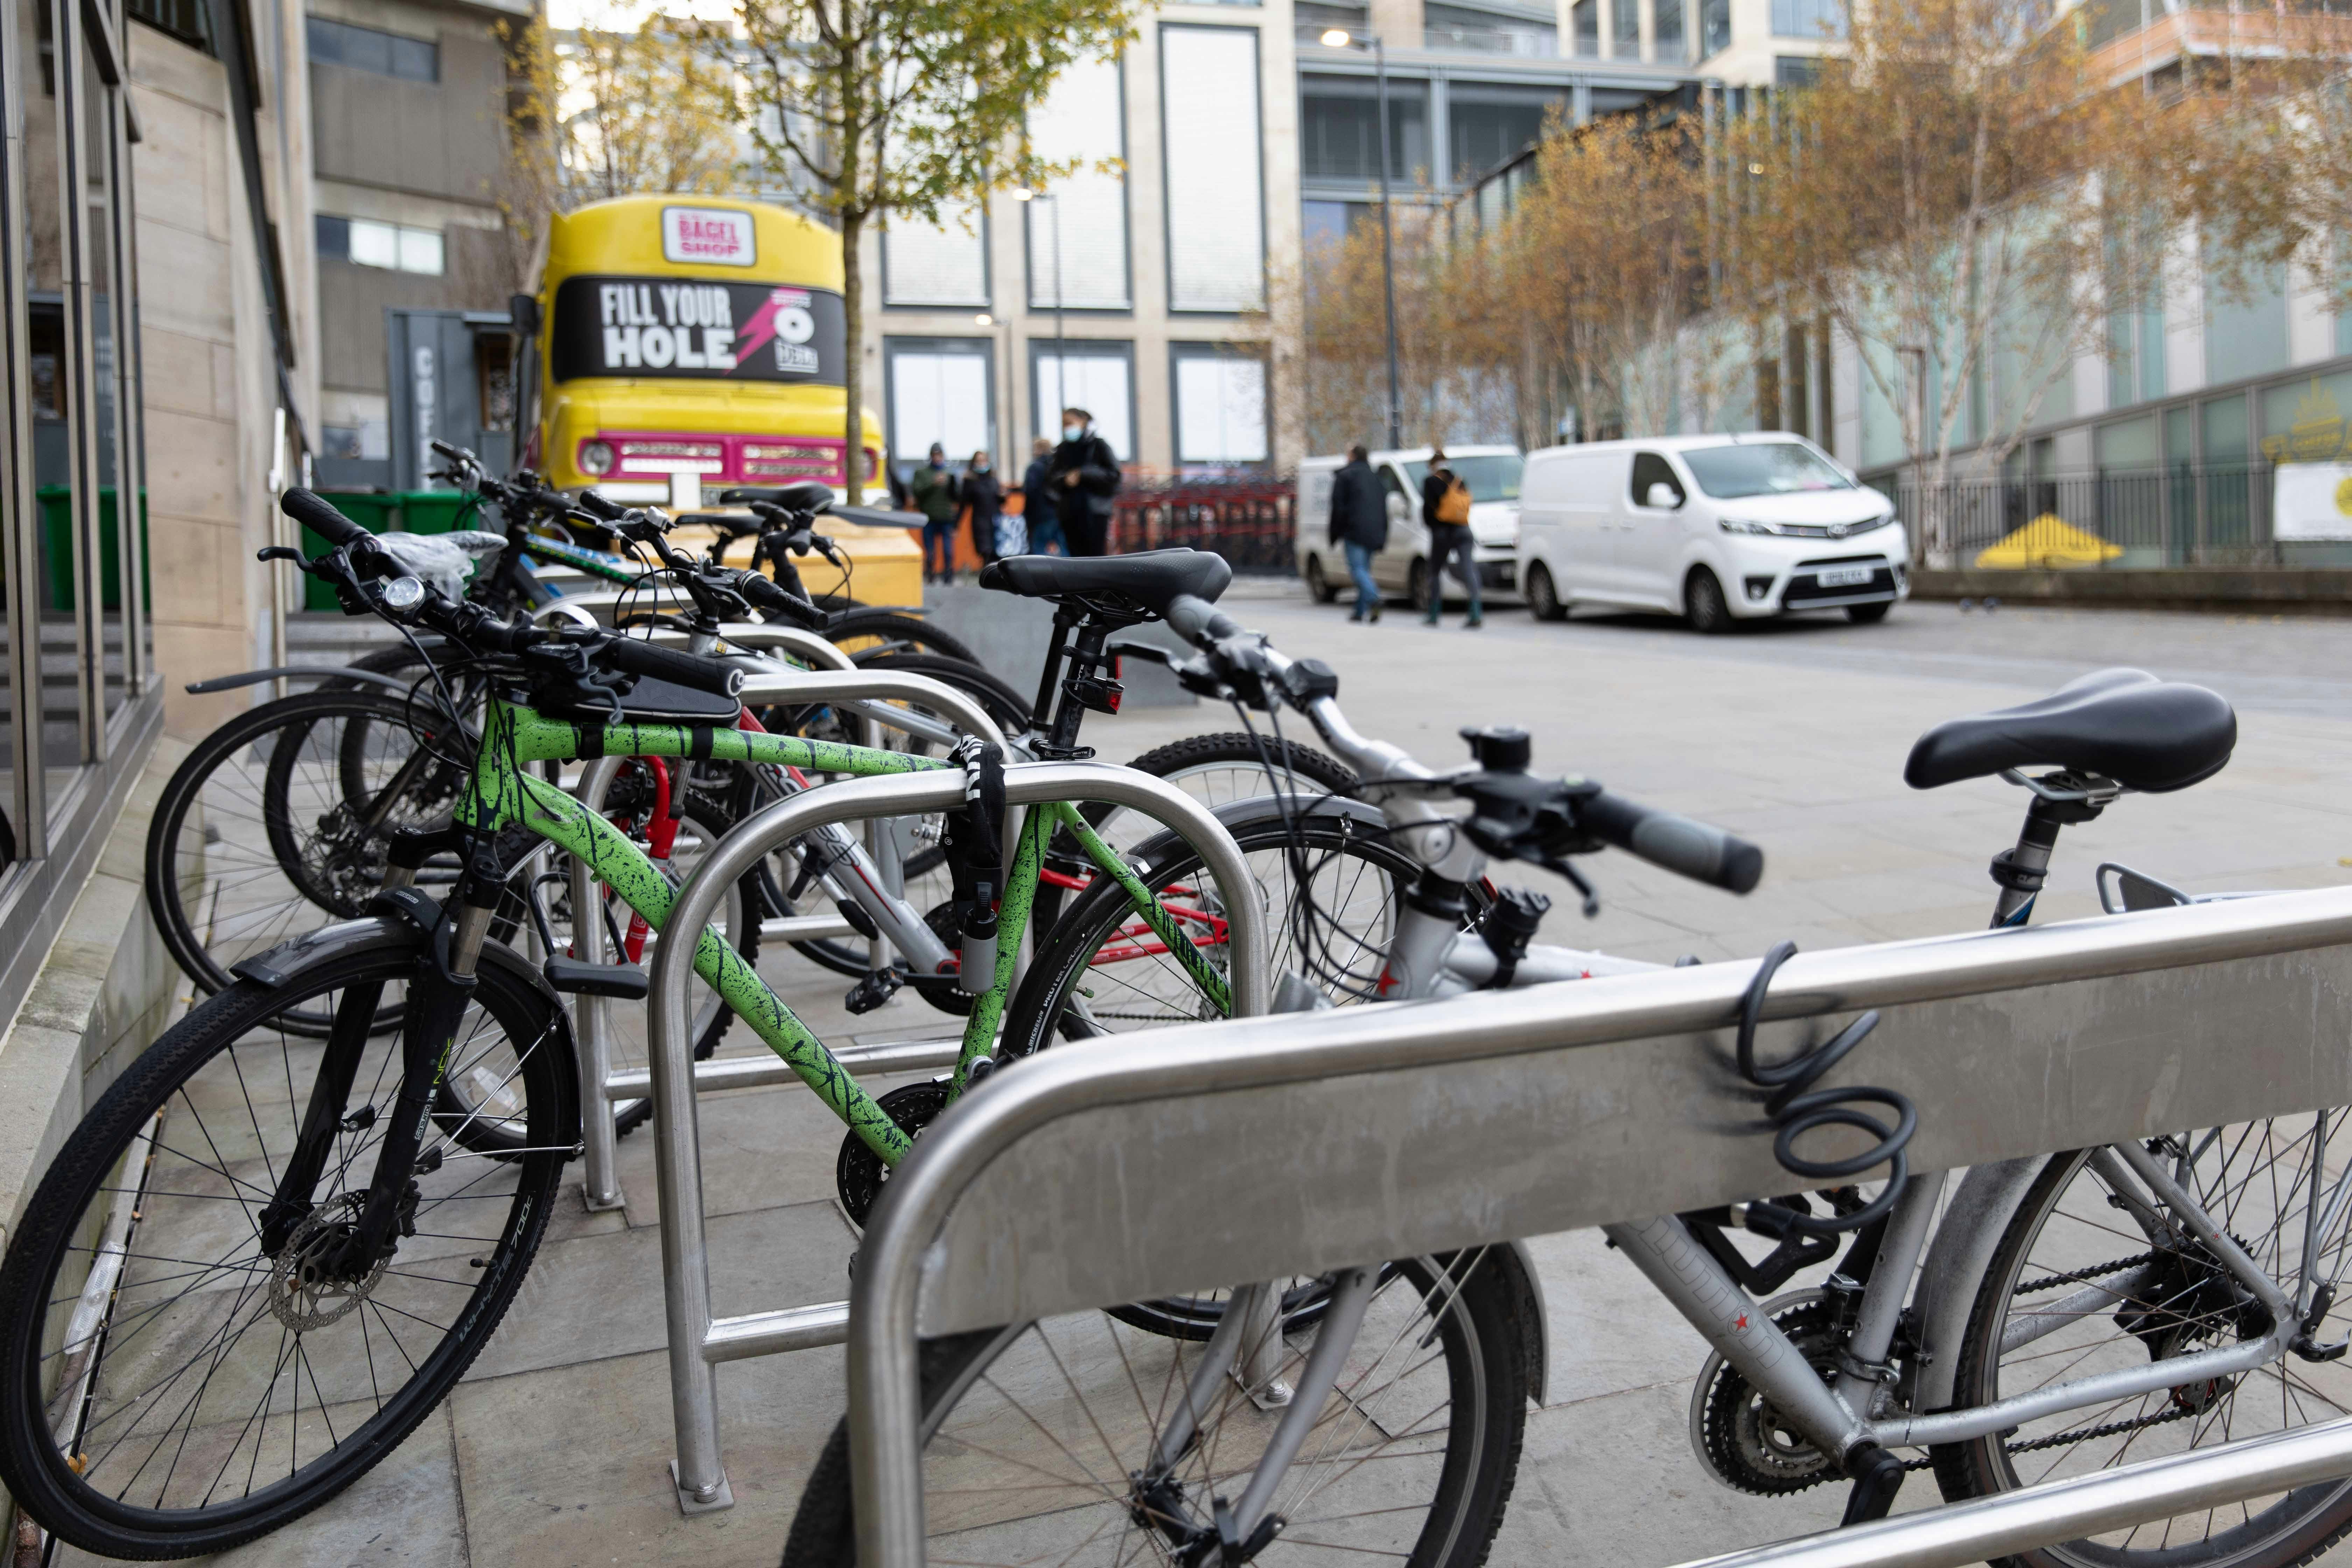 picture of parked bicycles at above location